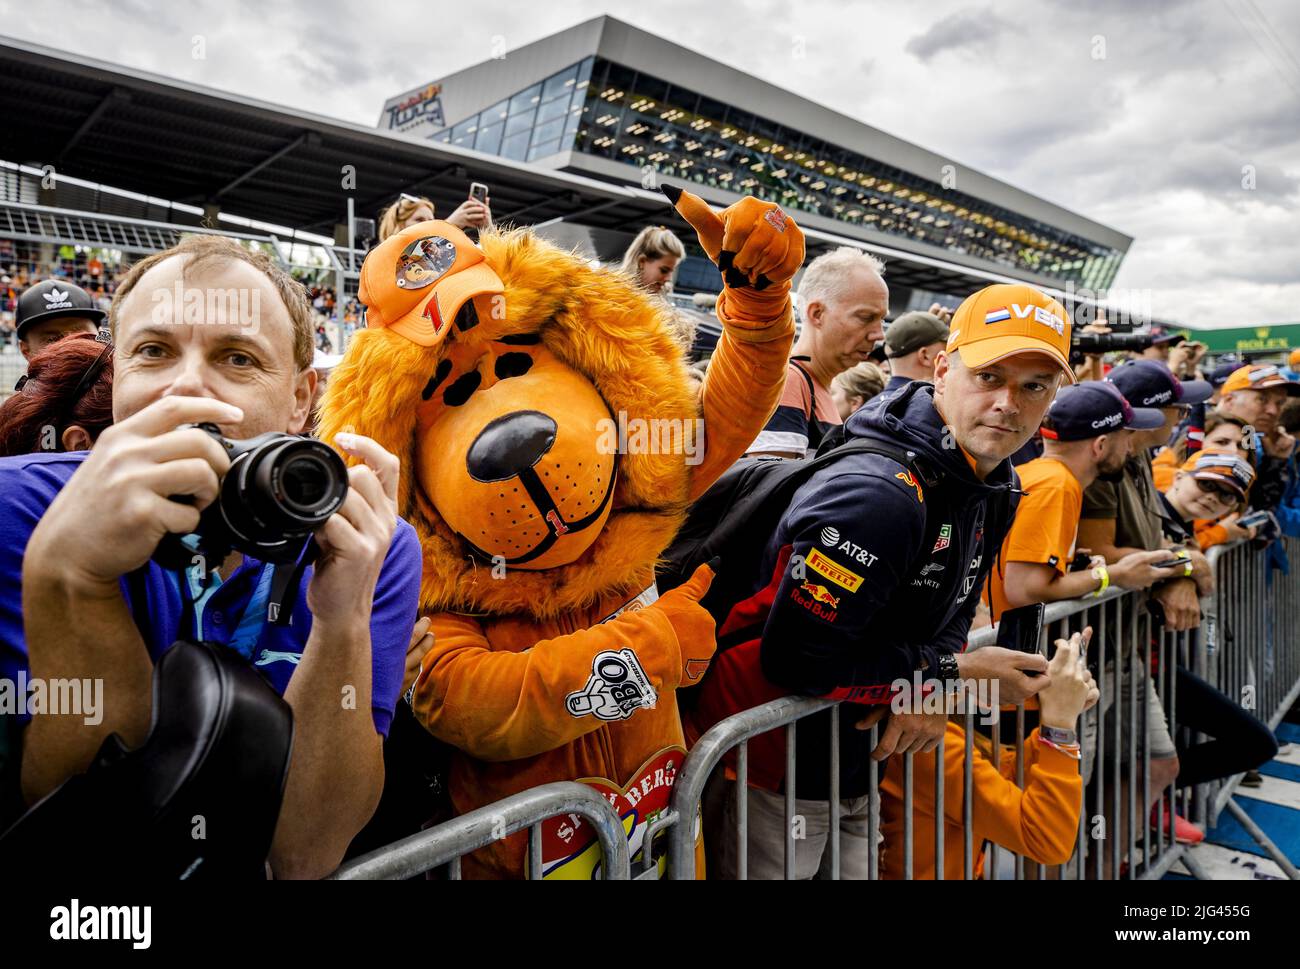 Austria, 2022-07-07 16:14:30 SPIELBERG - Fans of Max Verstappen watch the pitlane on the Red Bull Ring race track in the run-up to the Austrian Grand Prix. ANP SEM VAN DER WAL netherlands out - belgium out Stock Photo